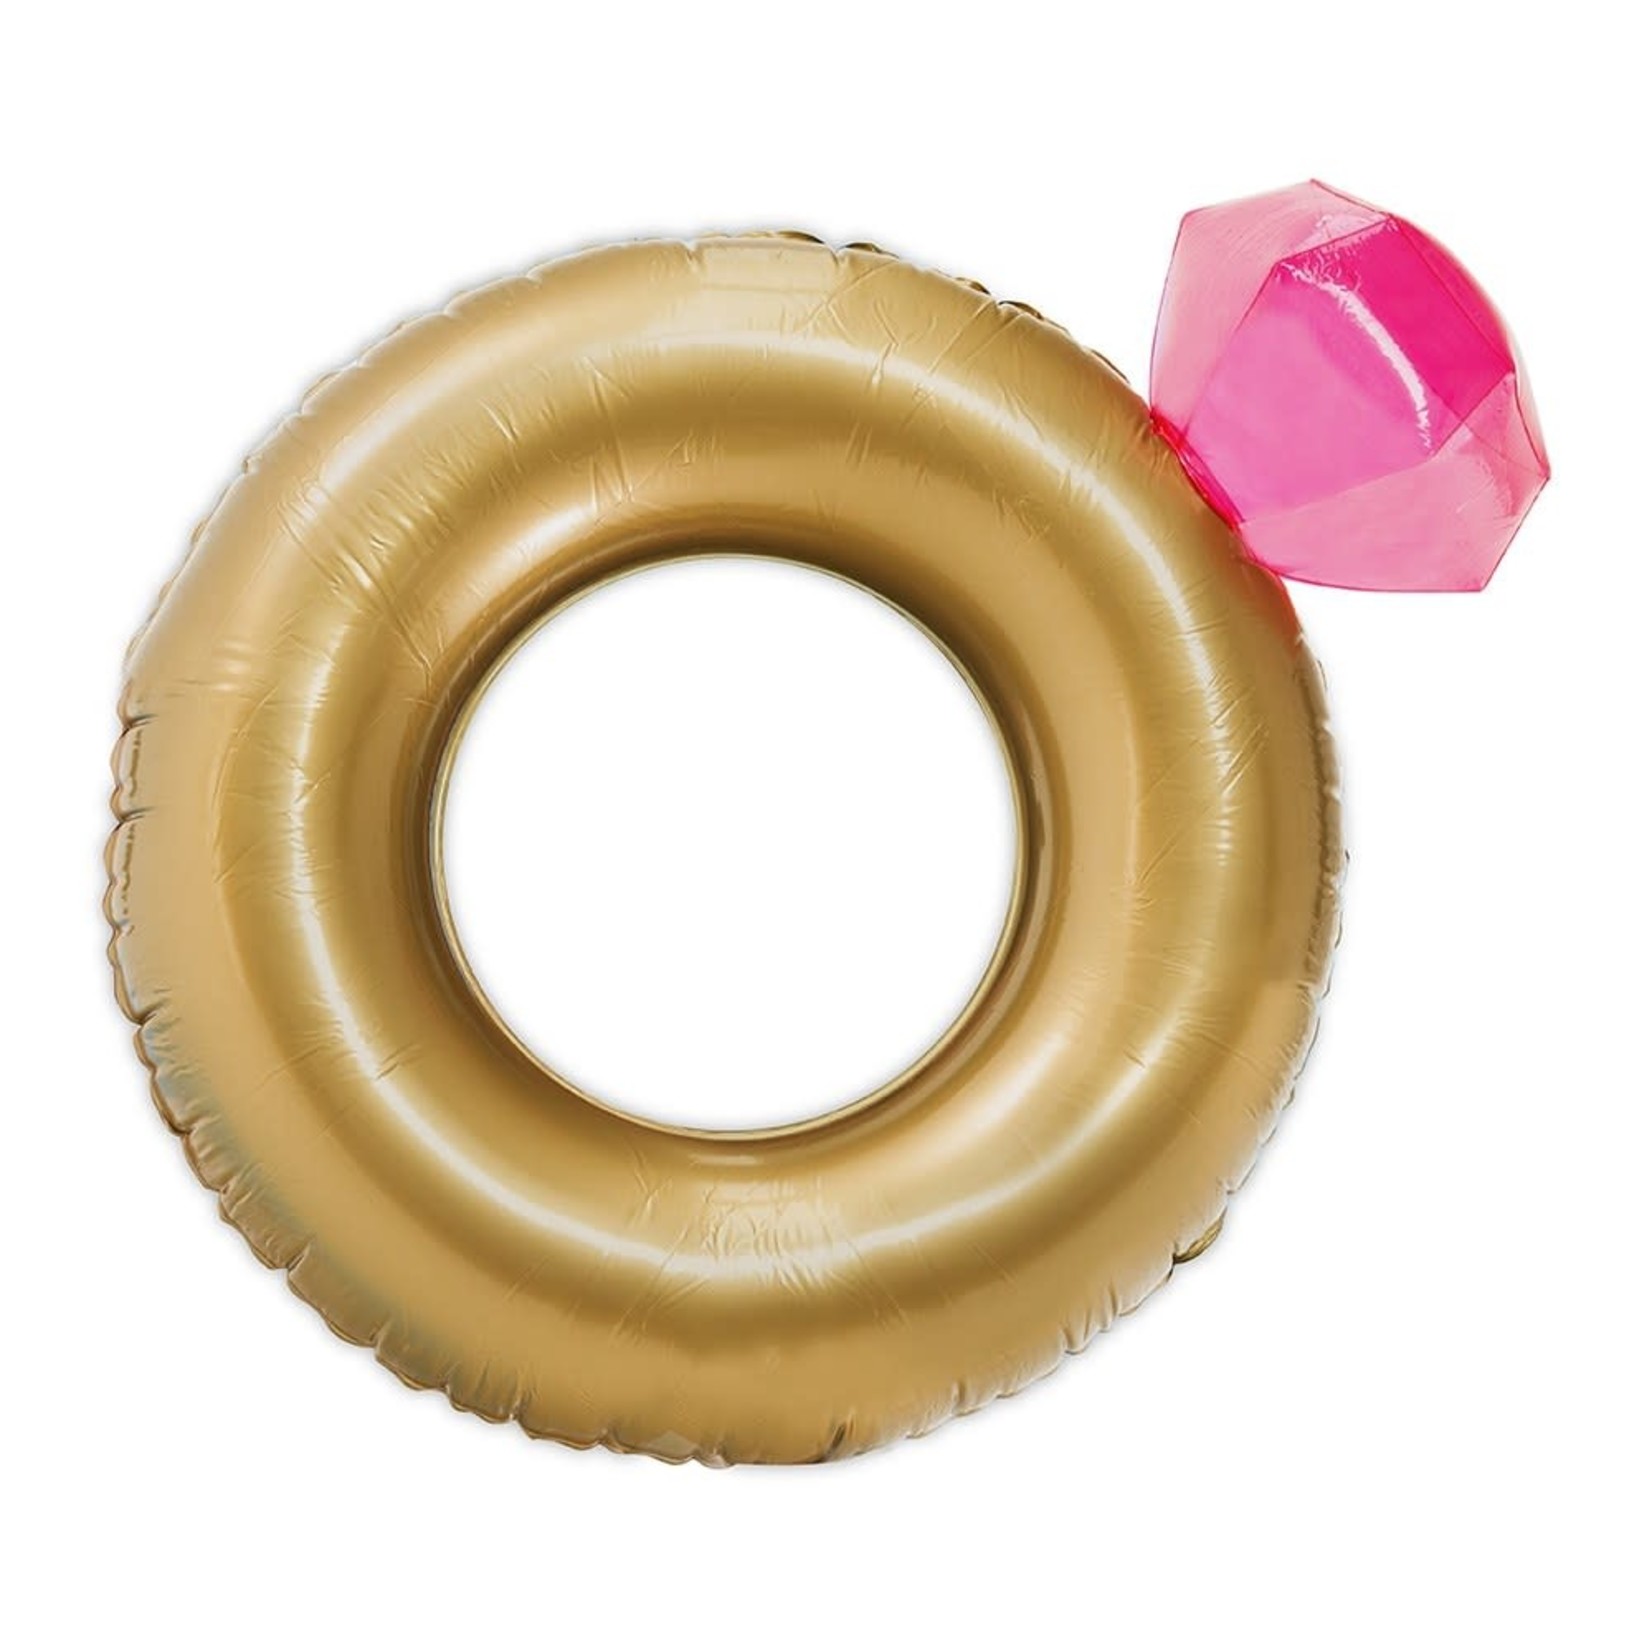 Creative Twist Events Giant Inflatable Pool Float Toy - Diamond Ring